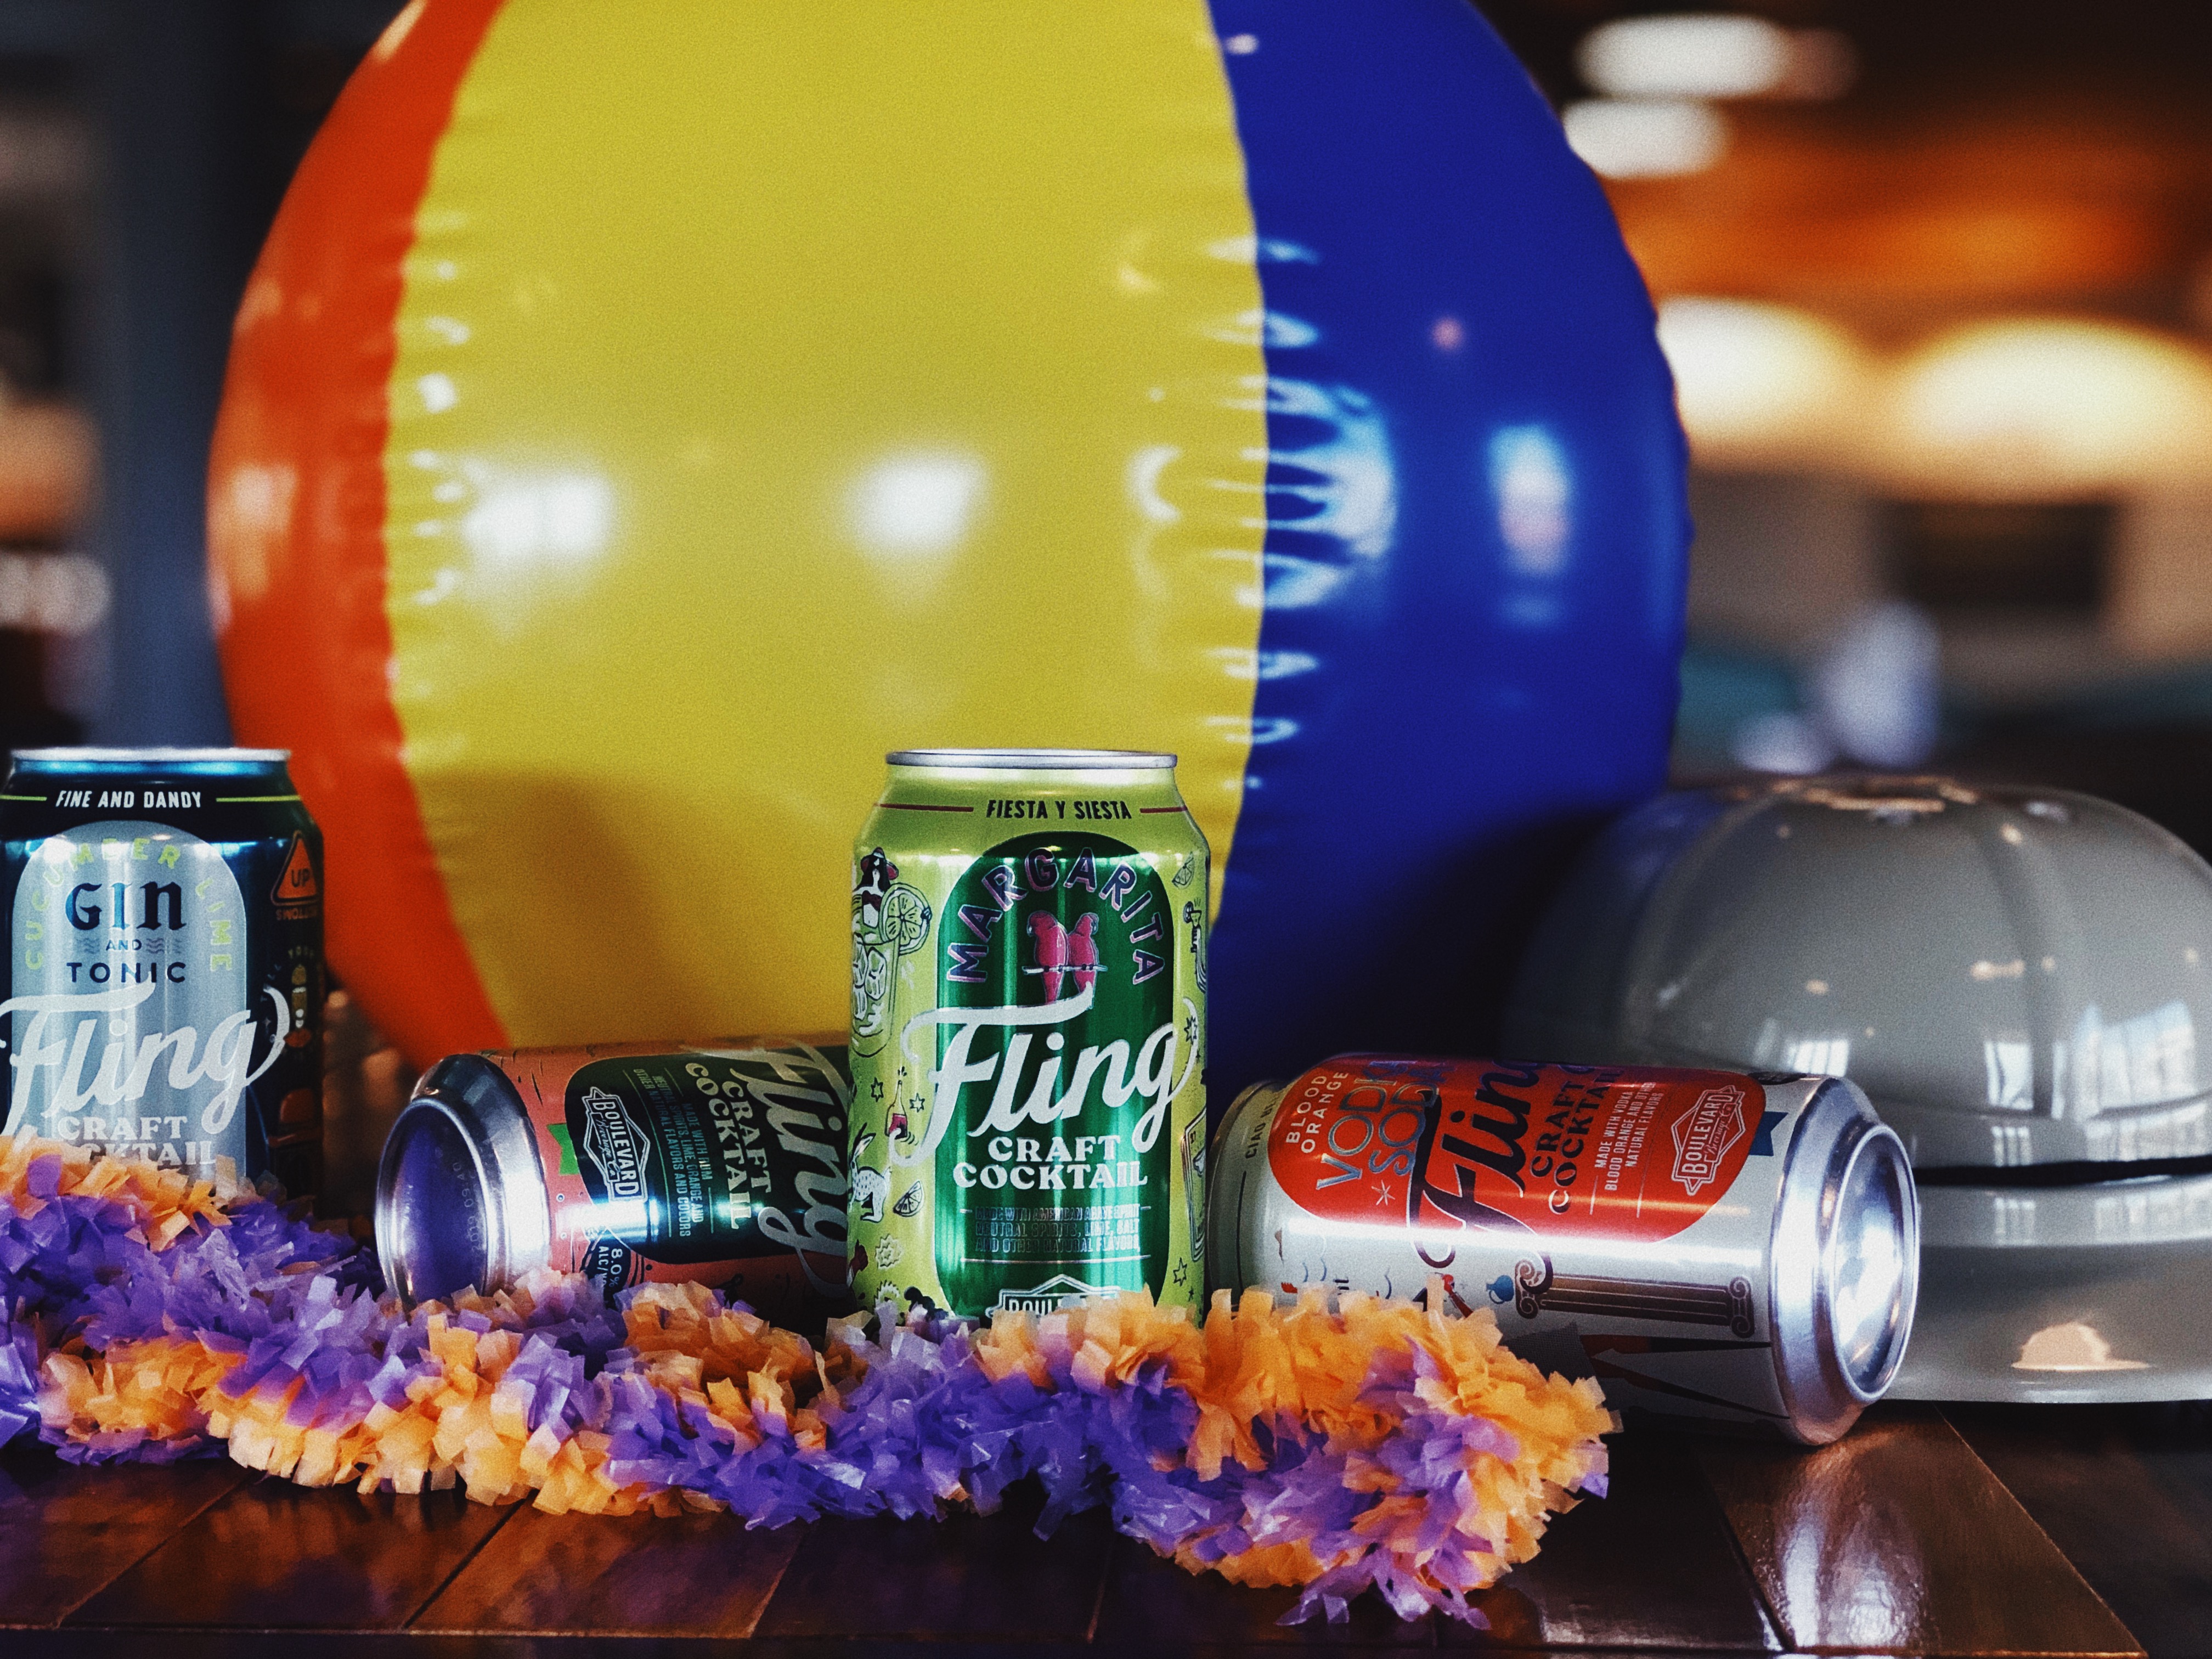 Fling Craft Cocktail Cans with Beach gear